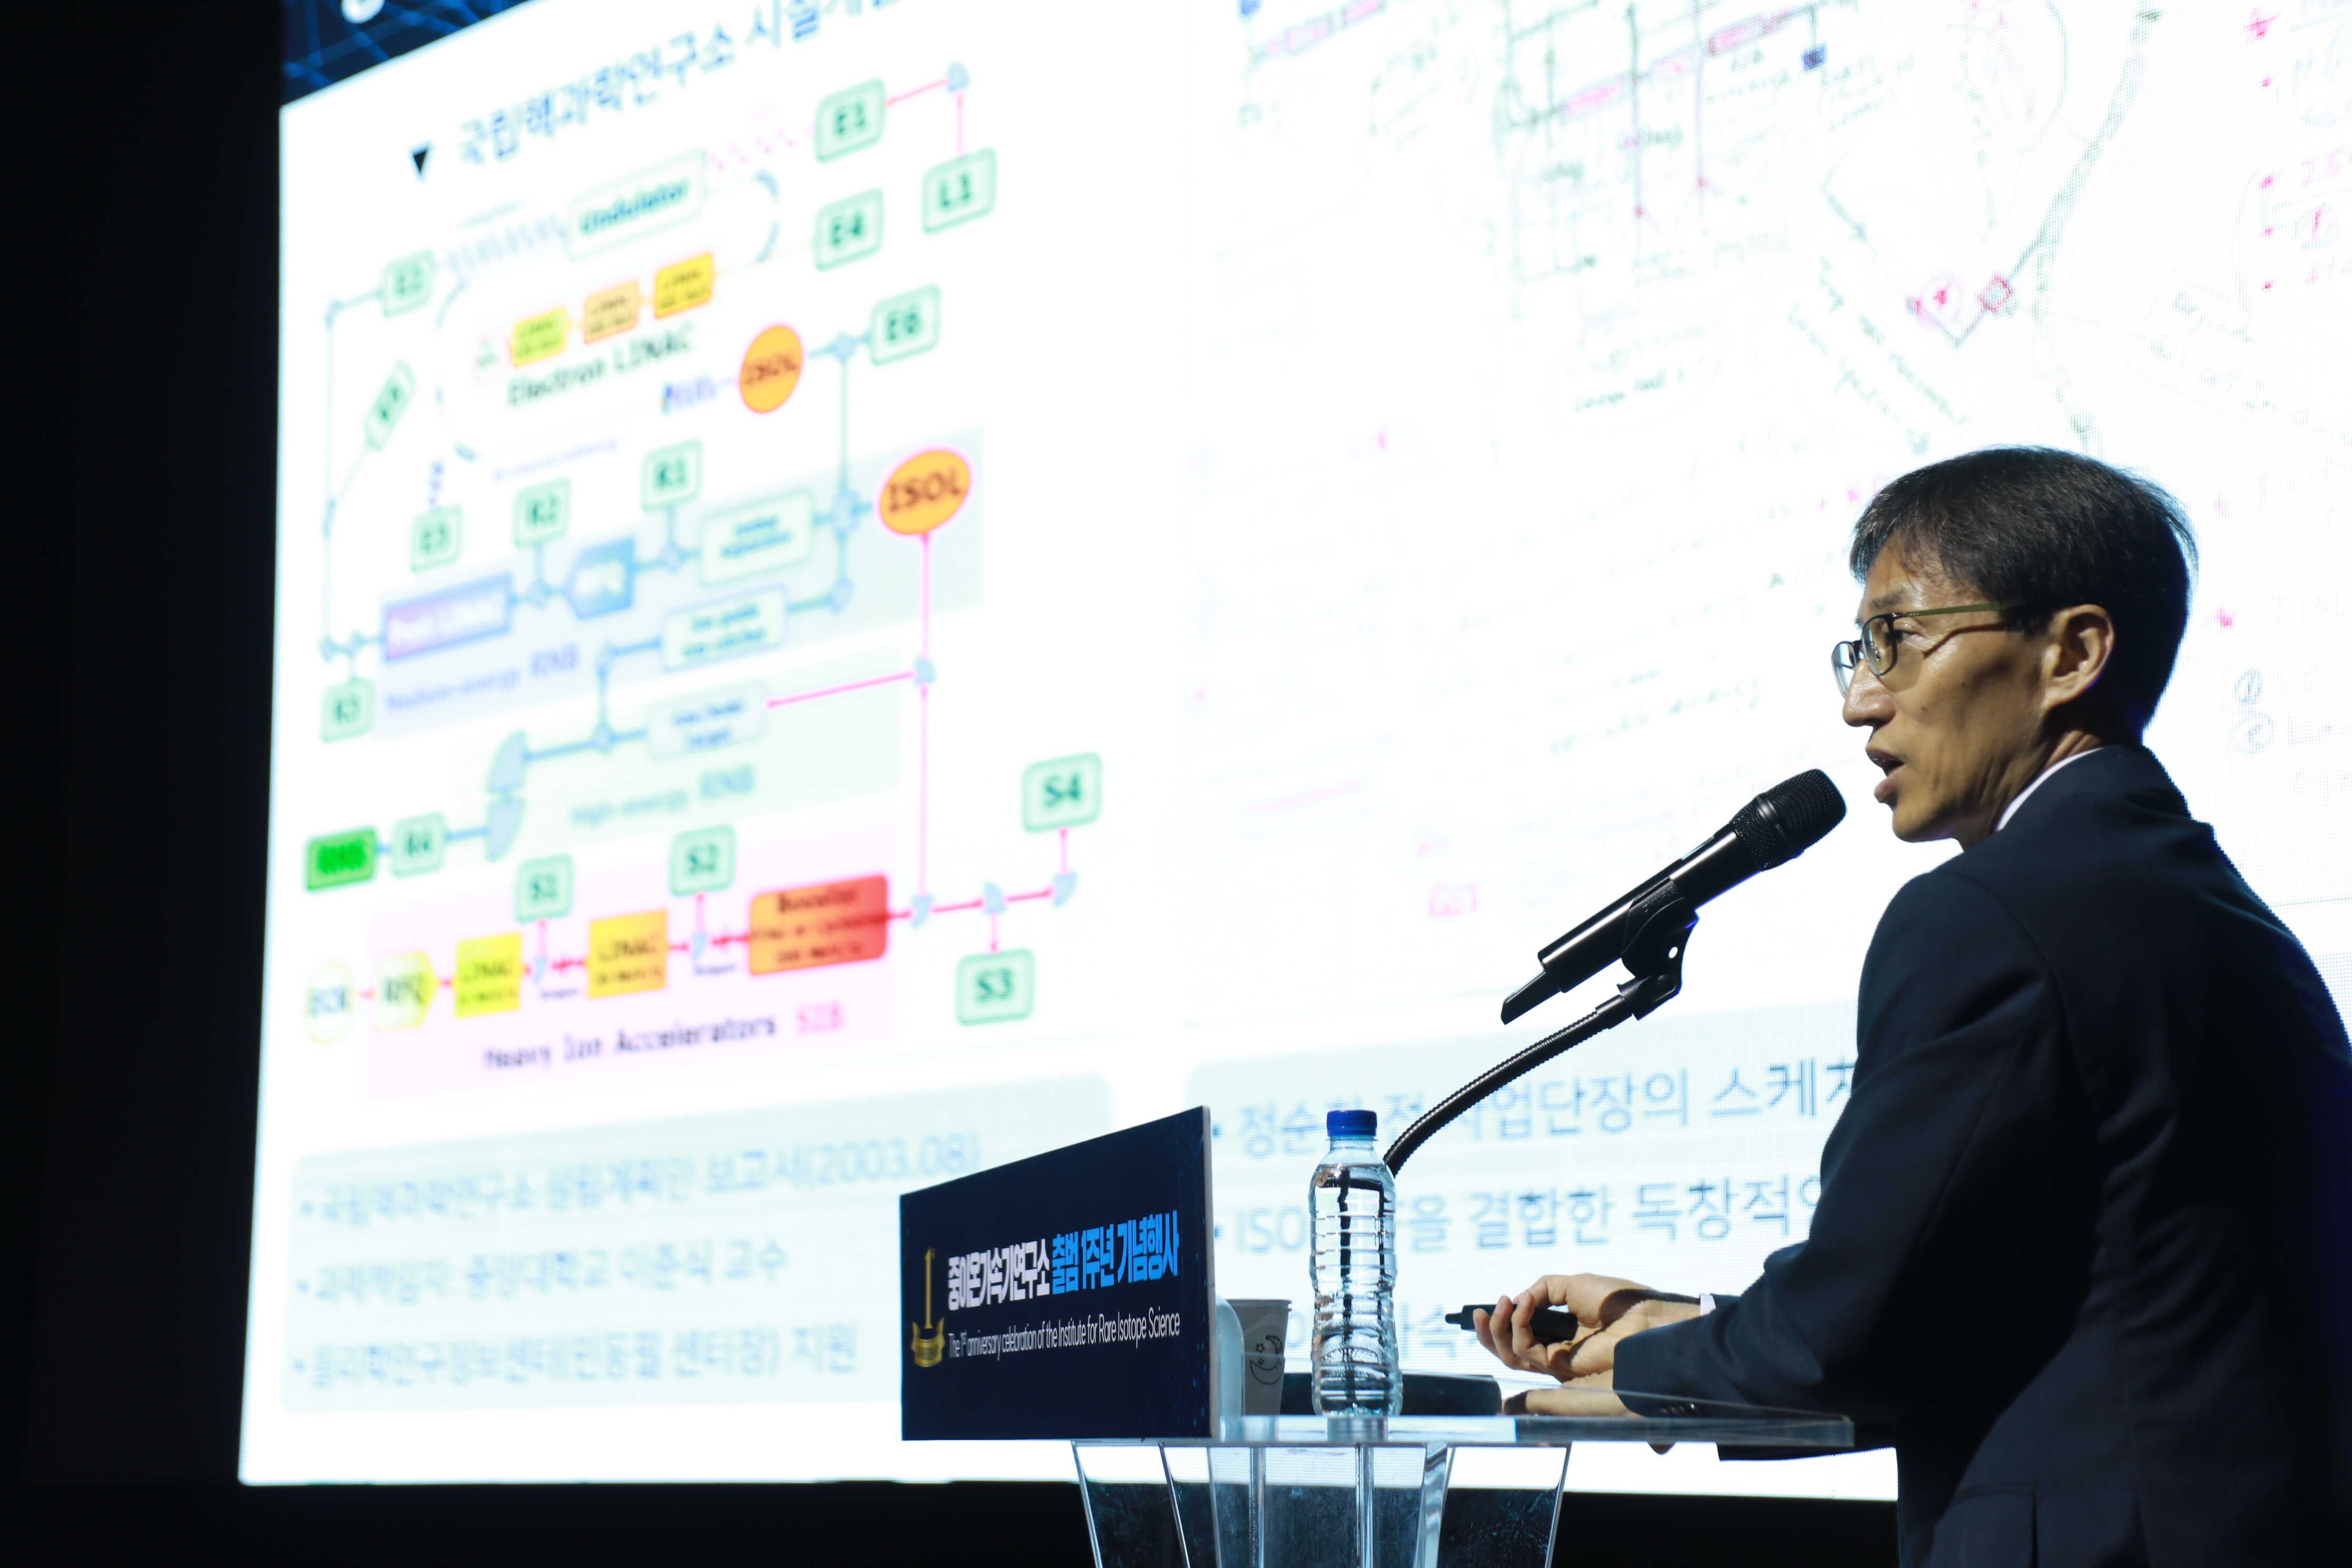 ▲ Presentation – Managing Director HONG Seung Woo of the Institute for Rare Isotope Science